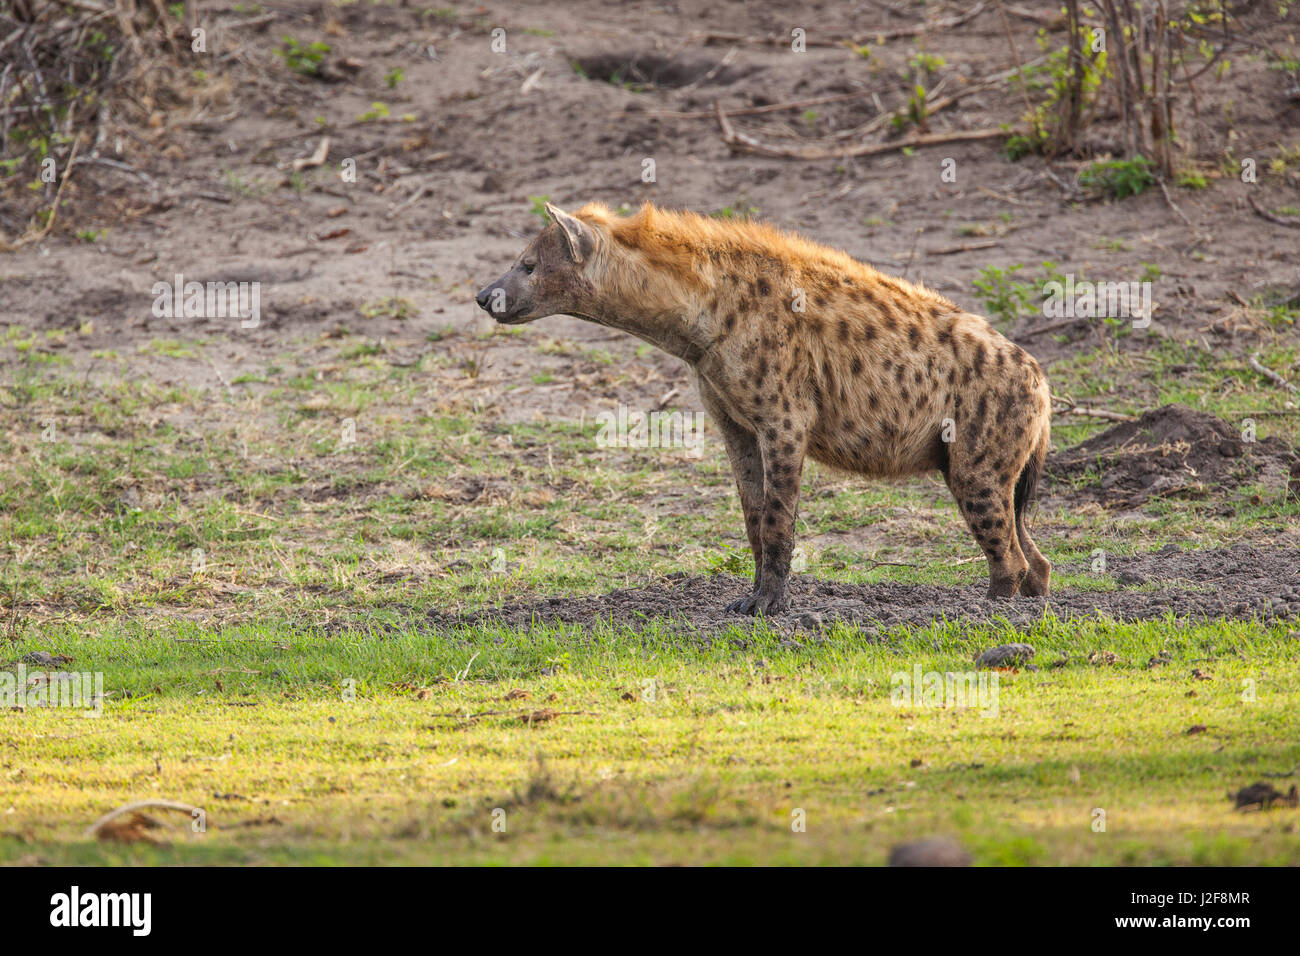 Spotted Hyena observes its environment Stock Photo